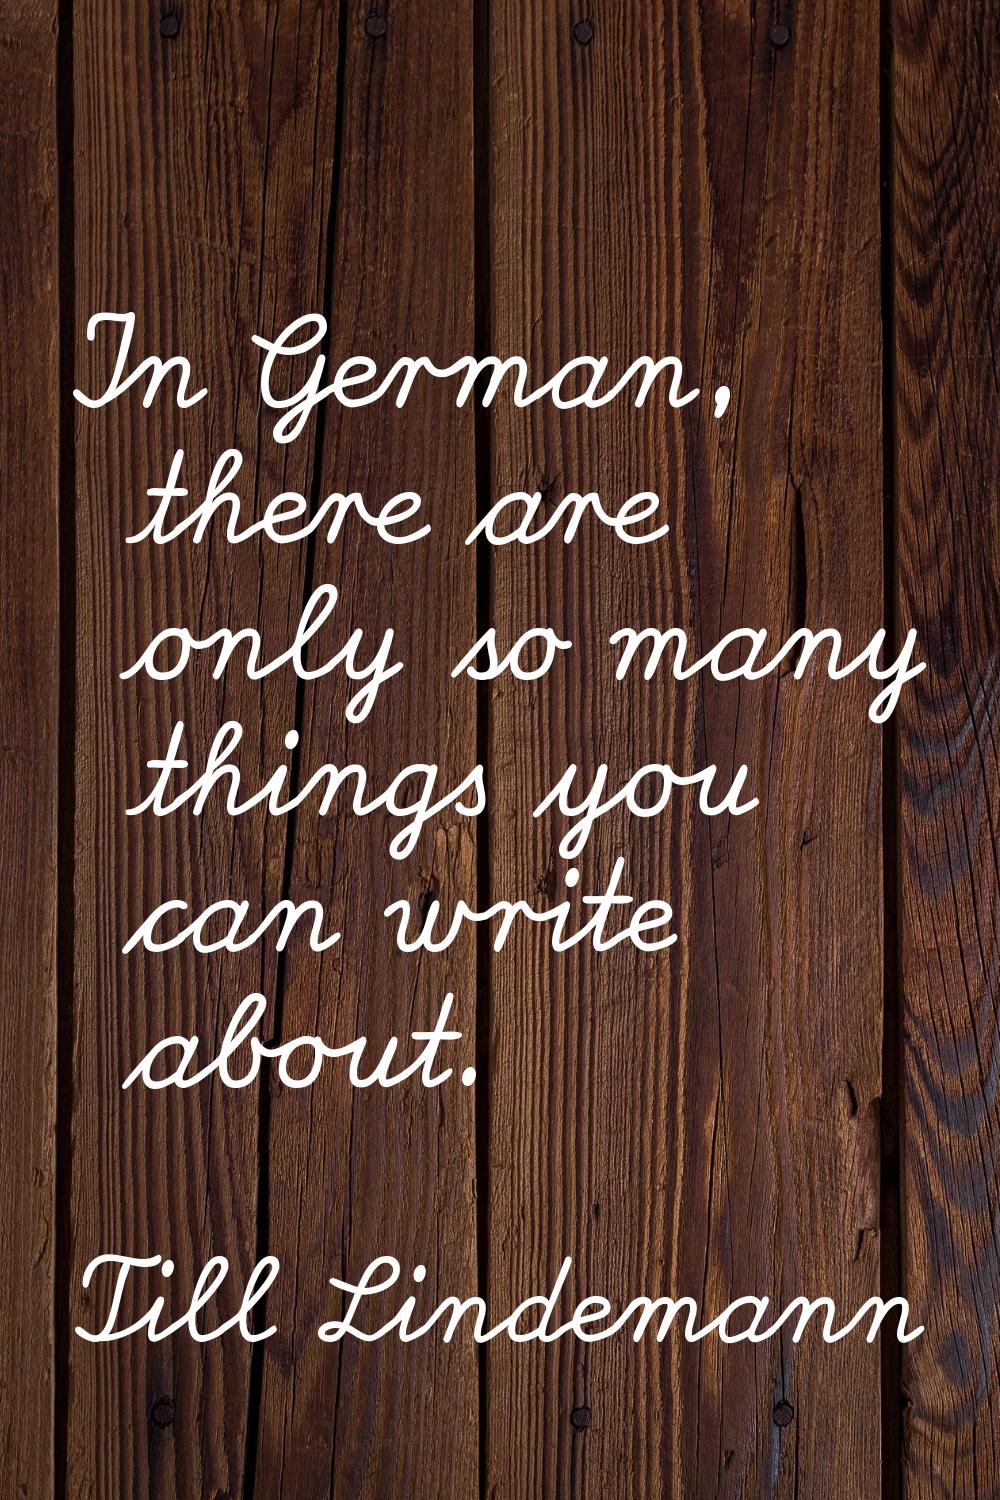 In German, there are only so many things you can write about.